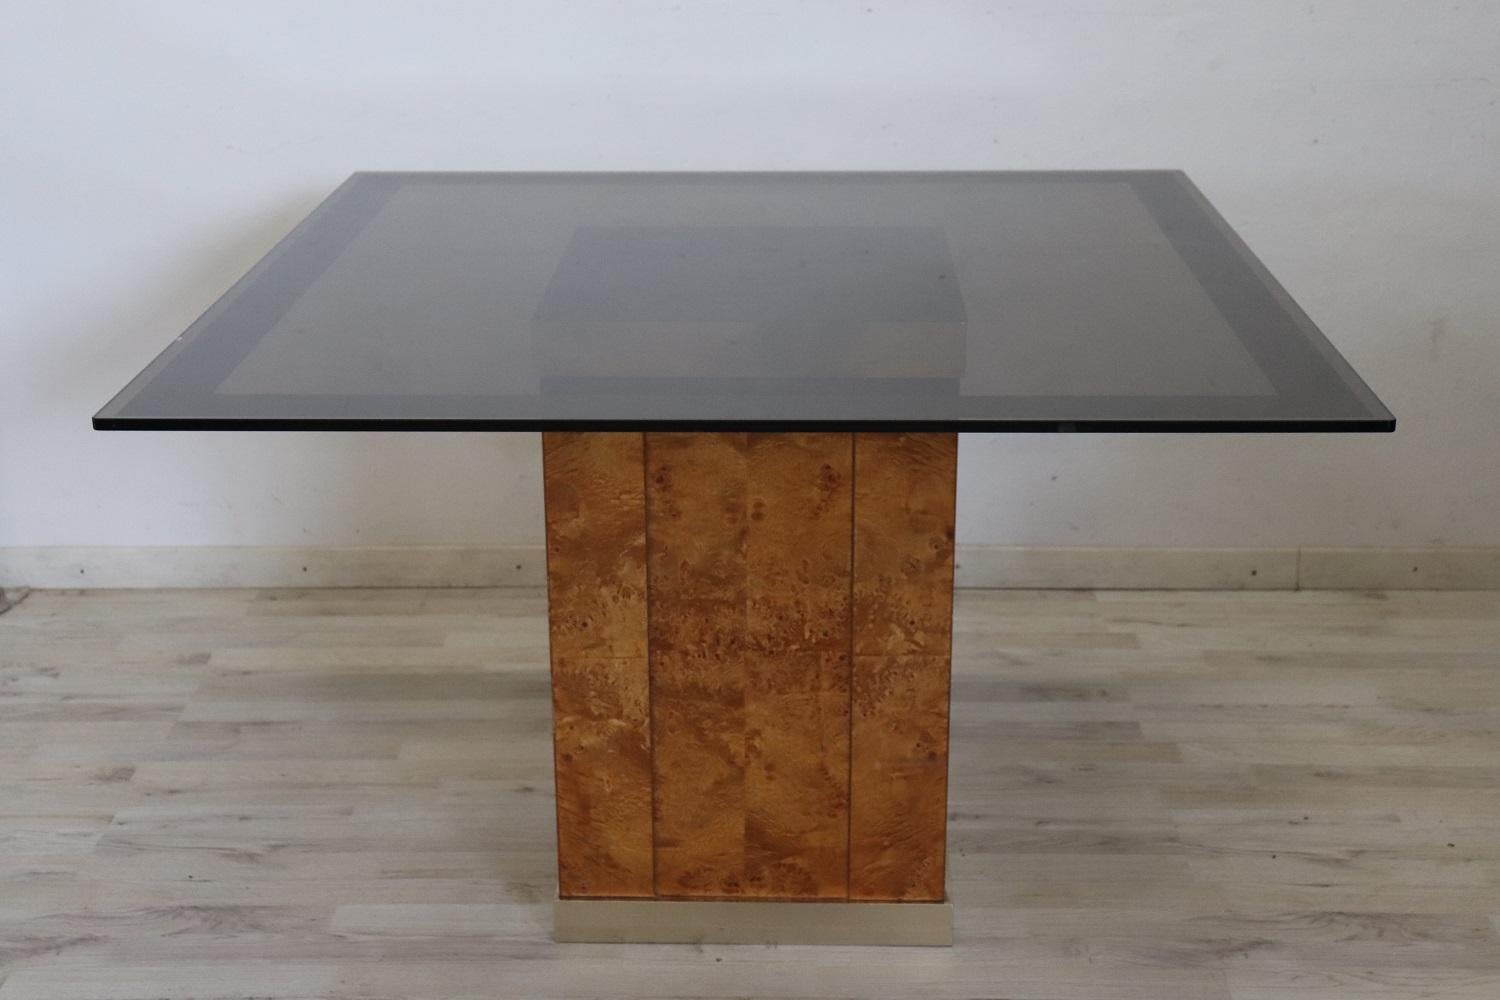 Rare and fine quality French design 1980s square luxury dining room table by Jean Claude Mahey for Roche Bobois. This fantastic table has a base in fine walnut root with golden metal details and a dark smoked glass top. There are some signs of wear